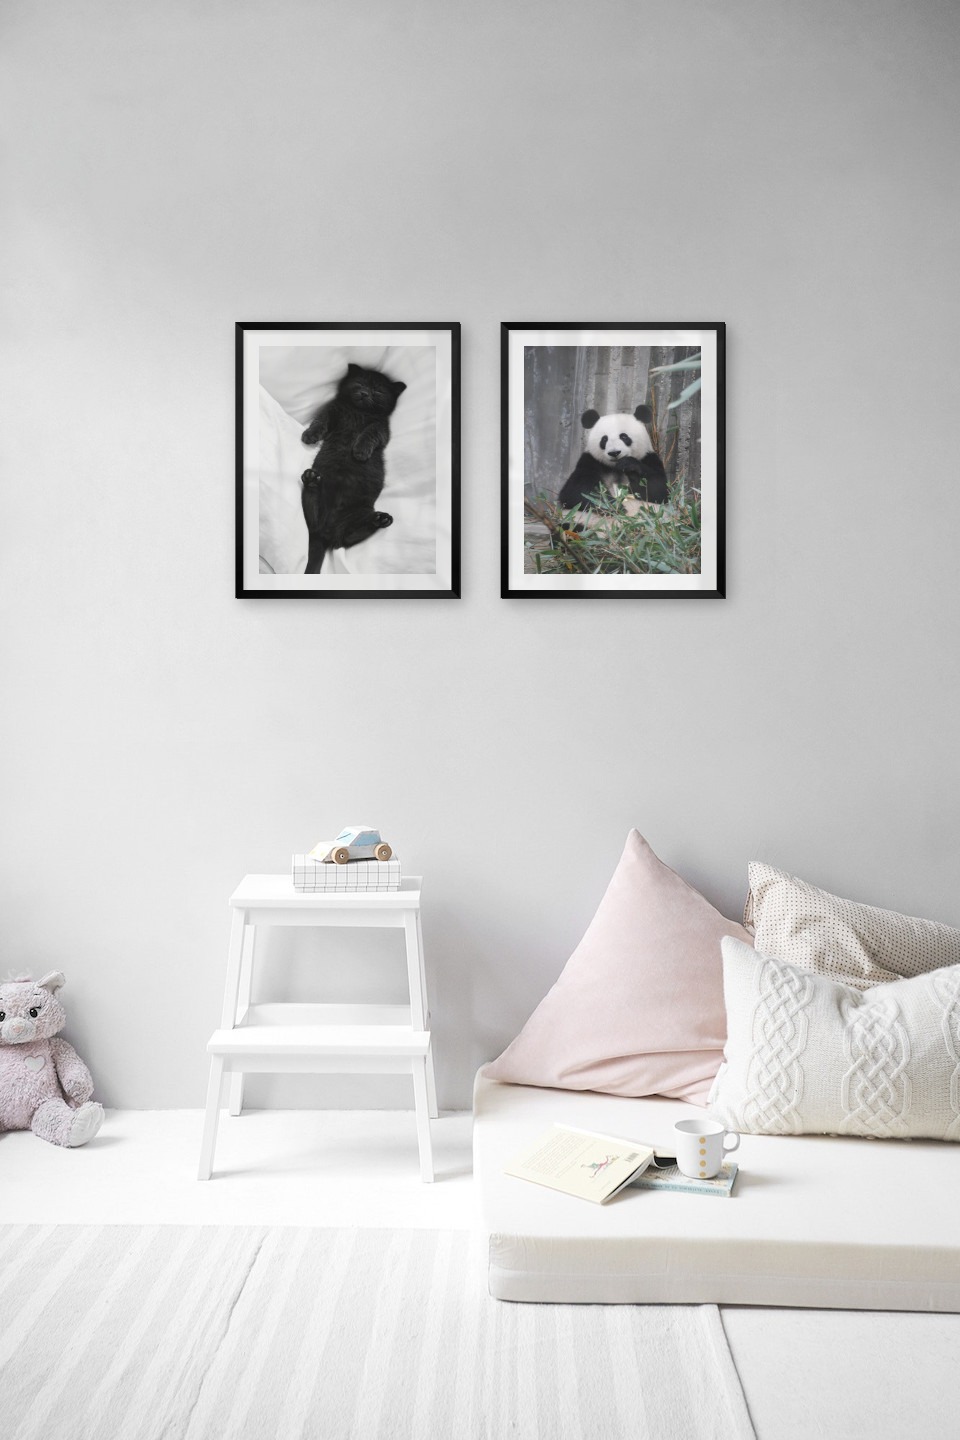 Gallery wall with picture frames in black in sizes 40x50 with prints "Cat in bed" and "Panda"